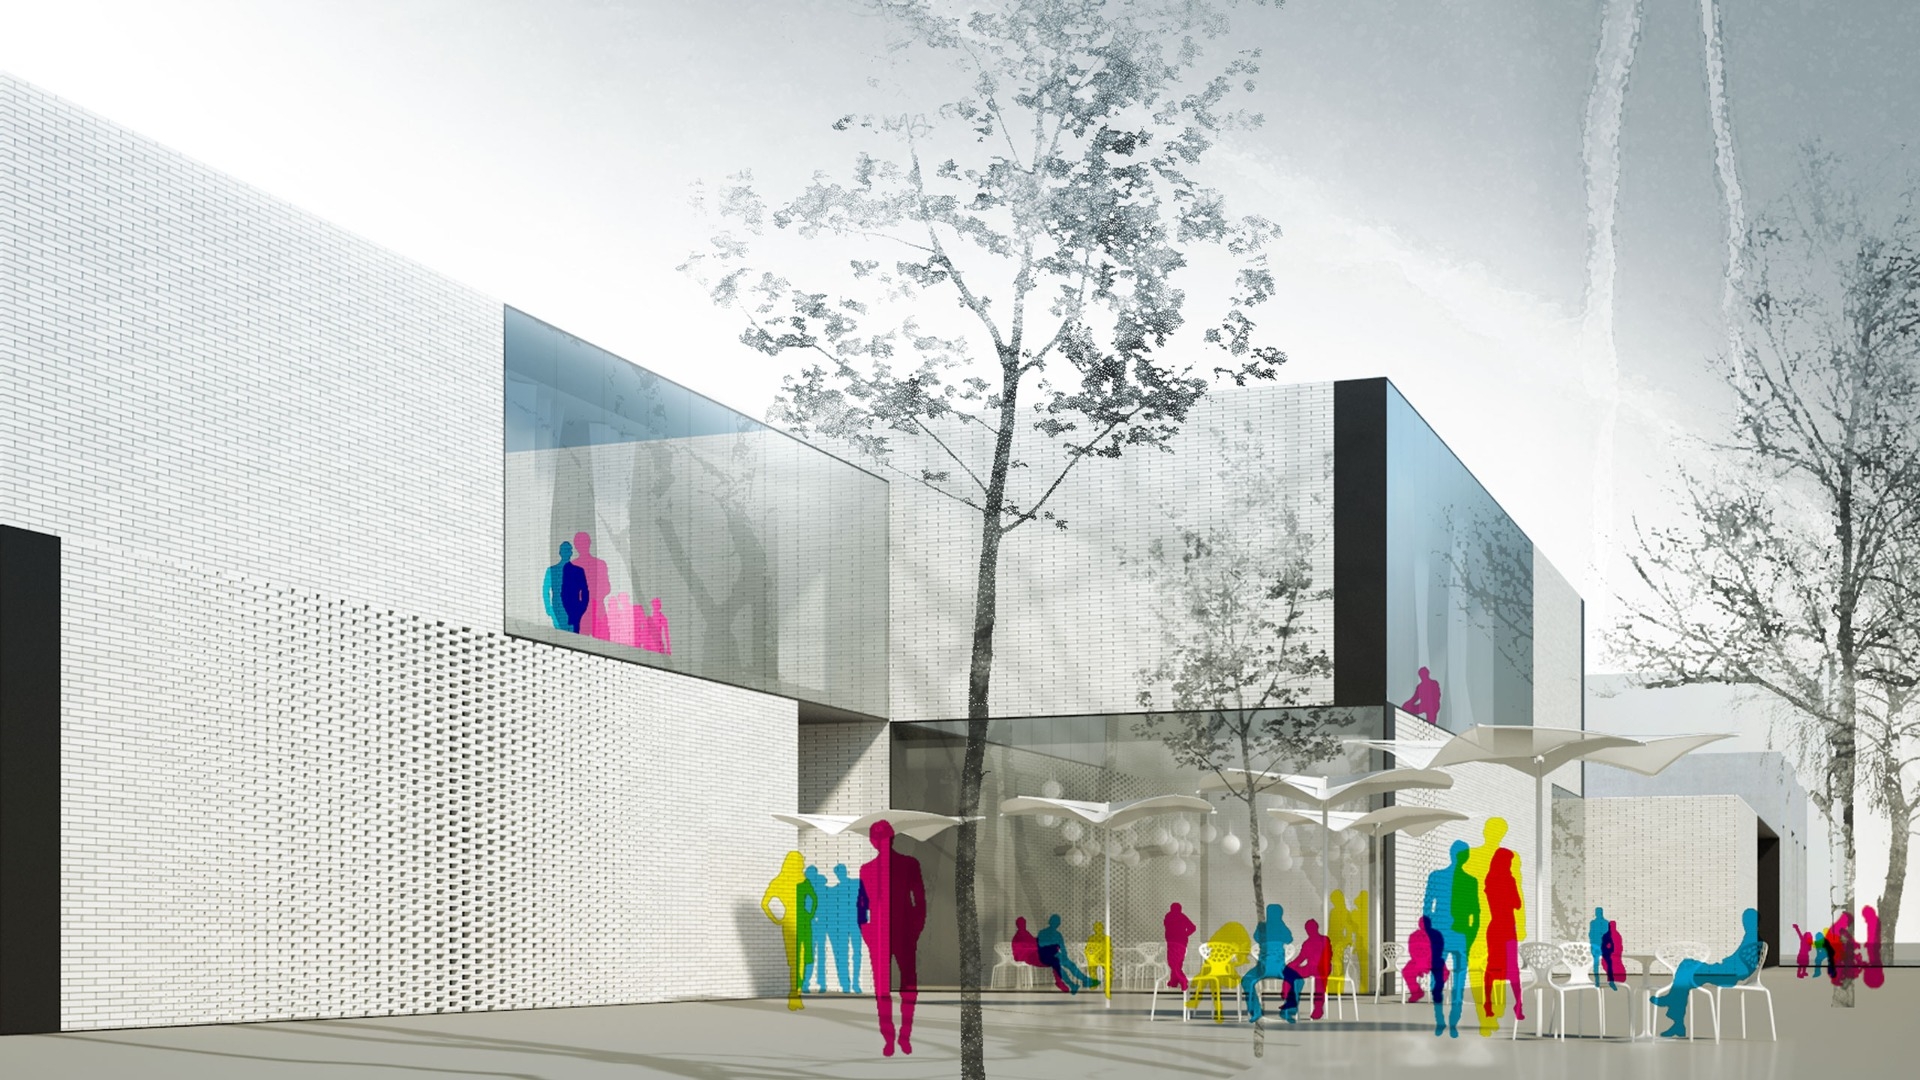 Competition for the building of Nowy Theatre